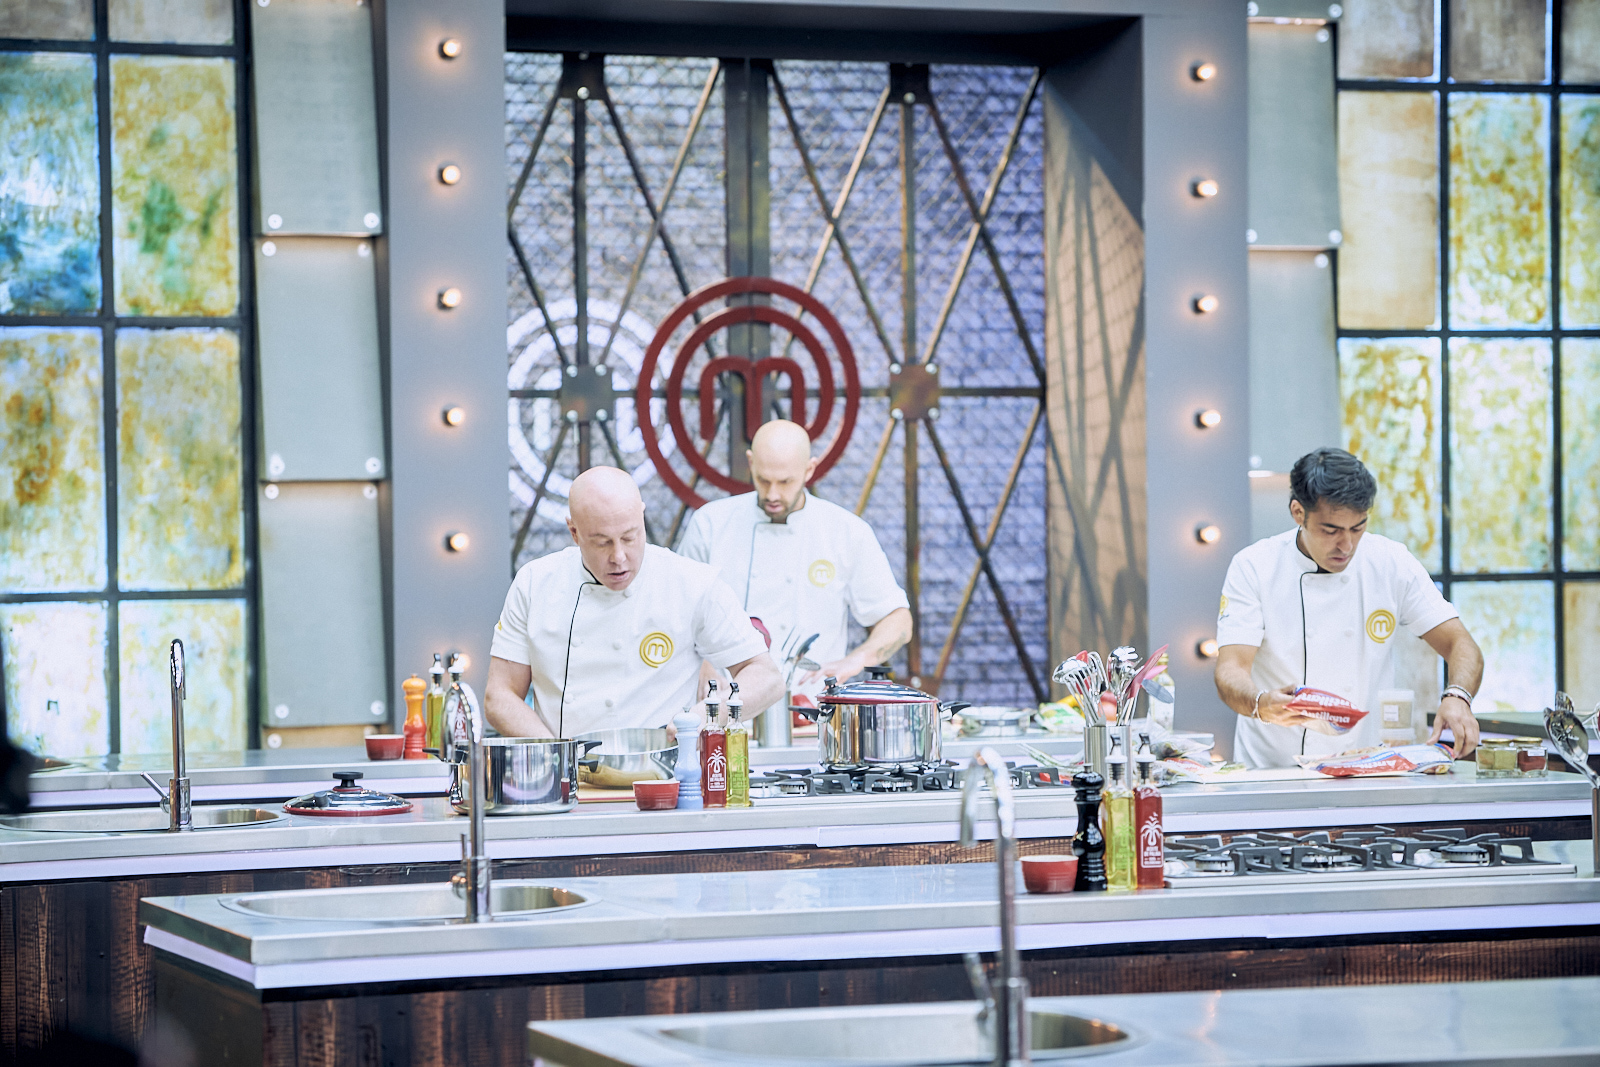 MasterChef juries competed against celebrities and gave them a lesson